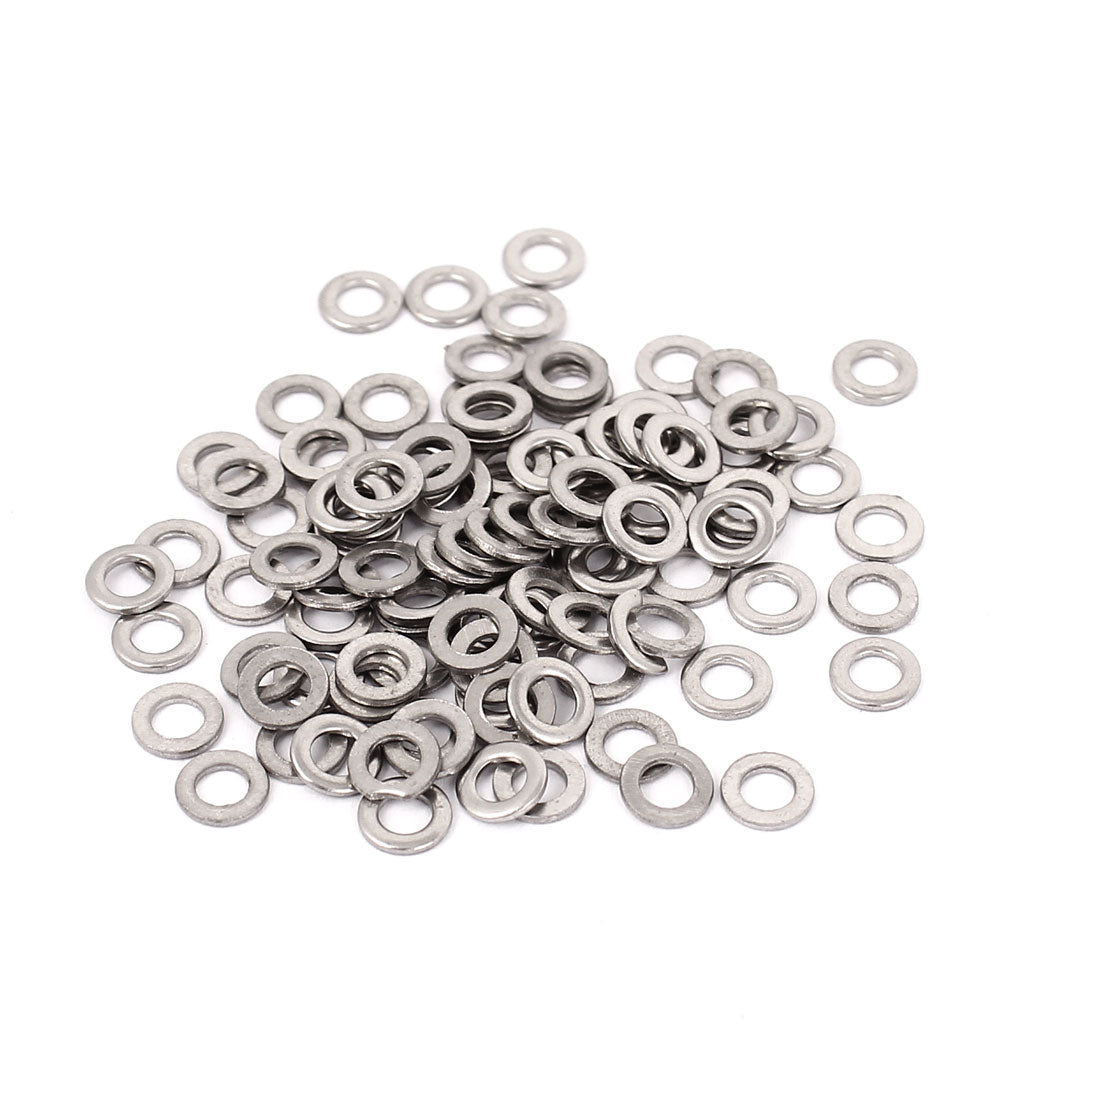 uxcell Uxcell 100Pcs M3x6mmx0.8mm Stainless Steel Metric Round Flat Washer for Bolt Screw